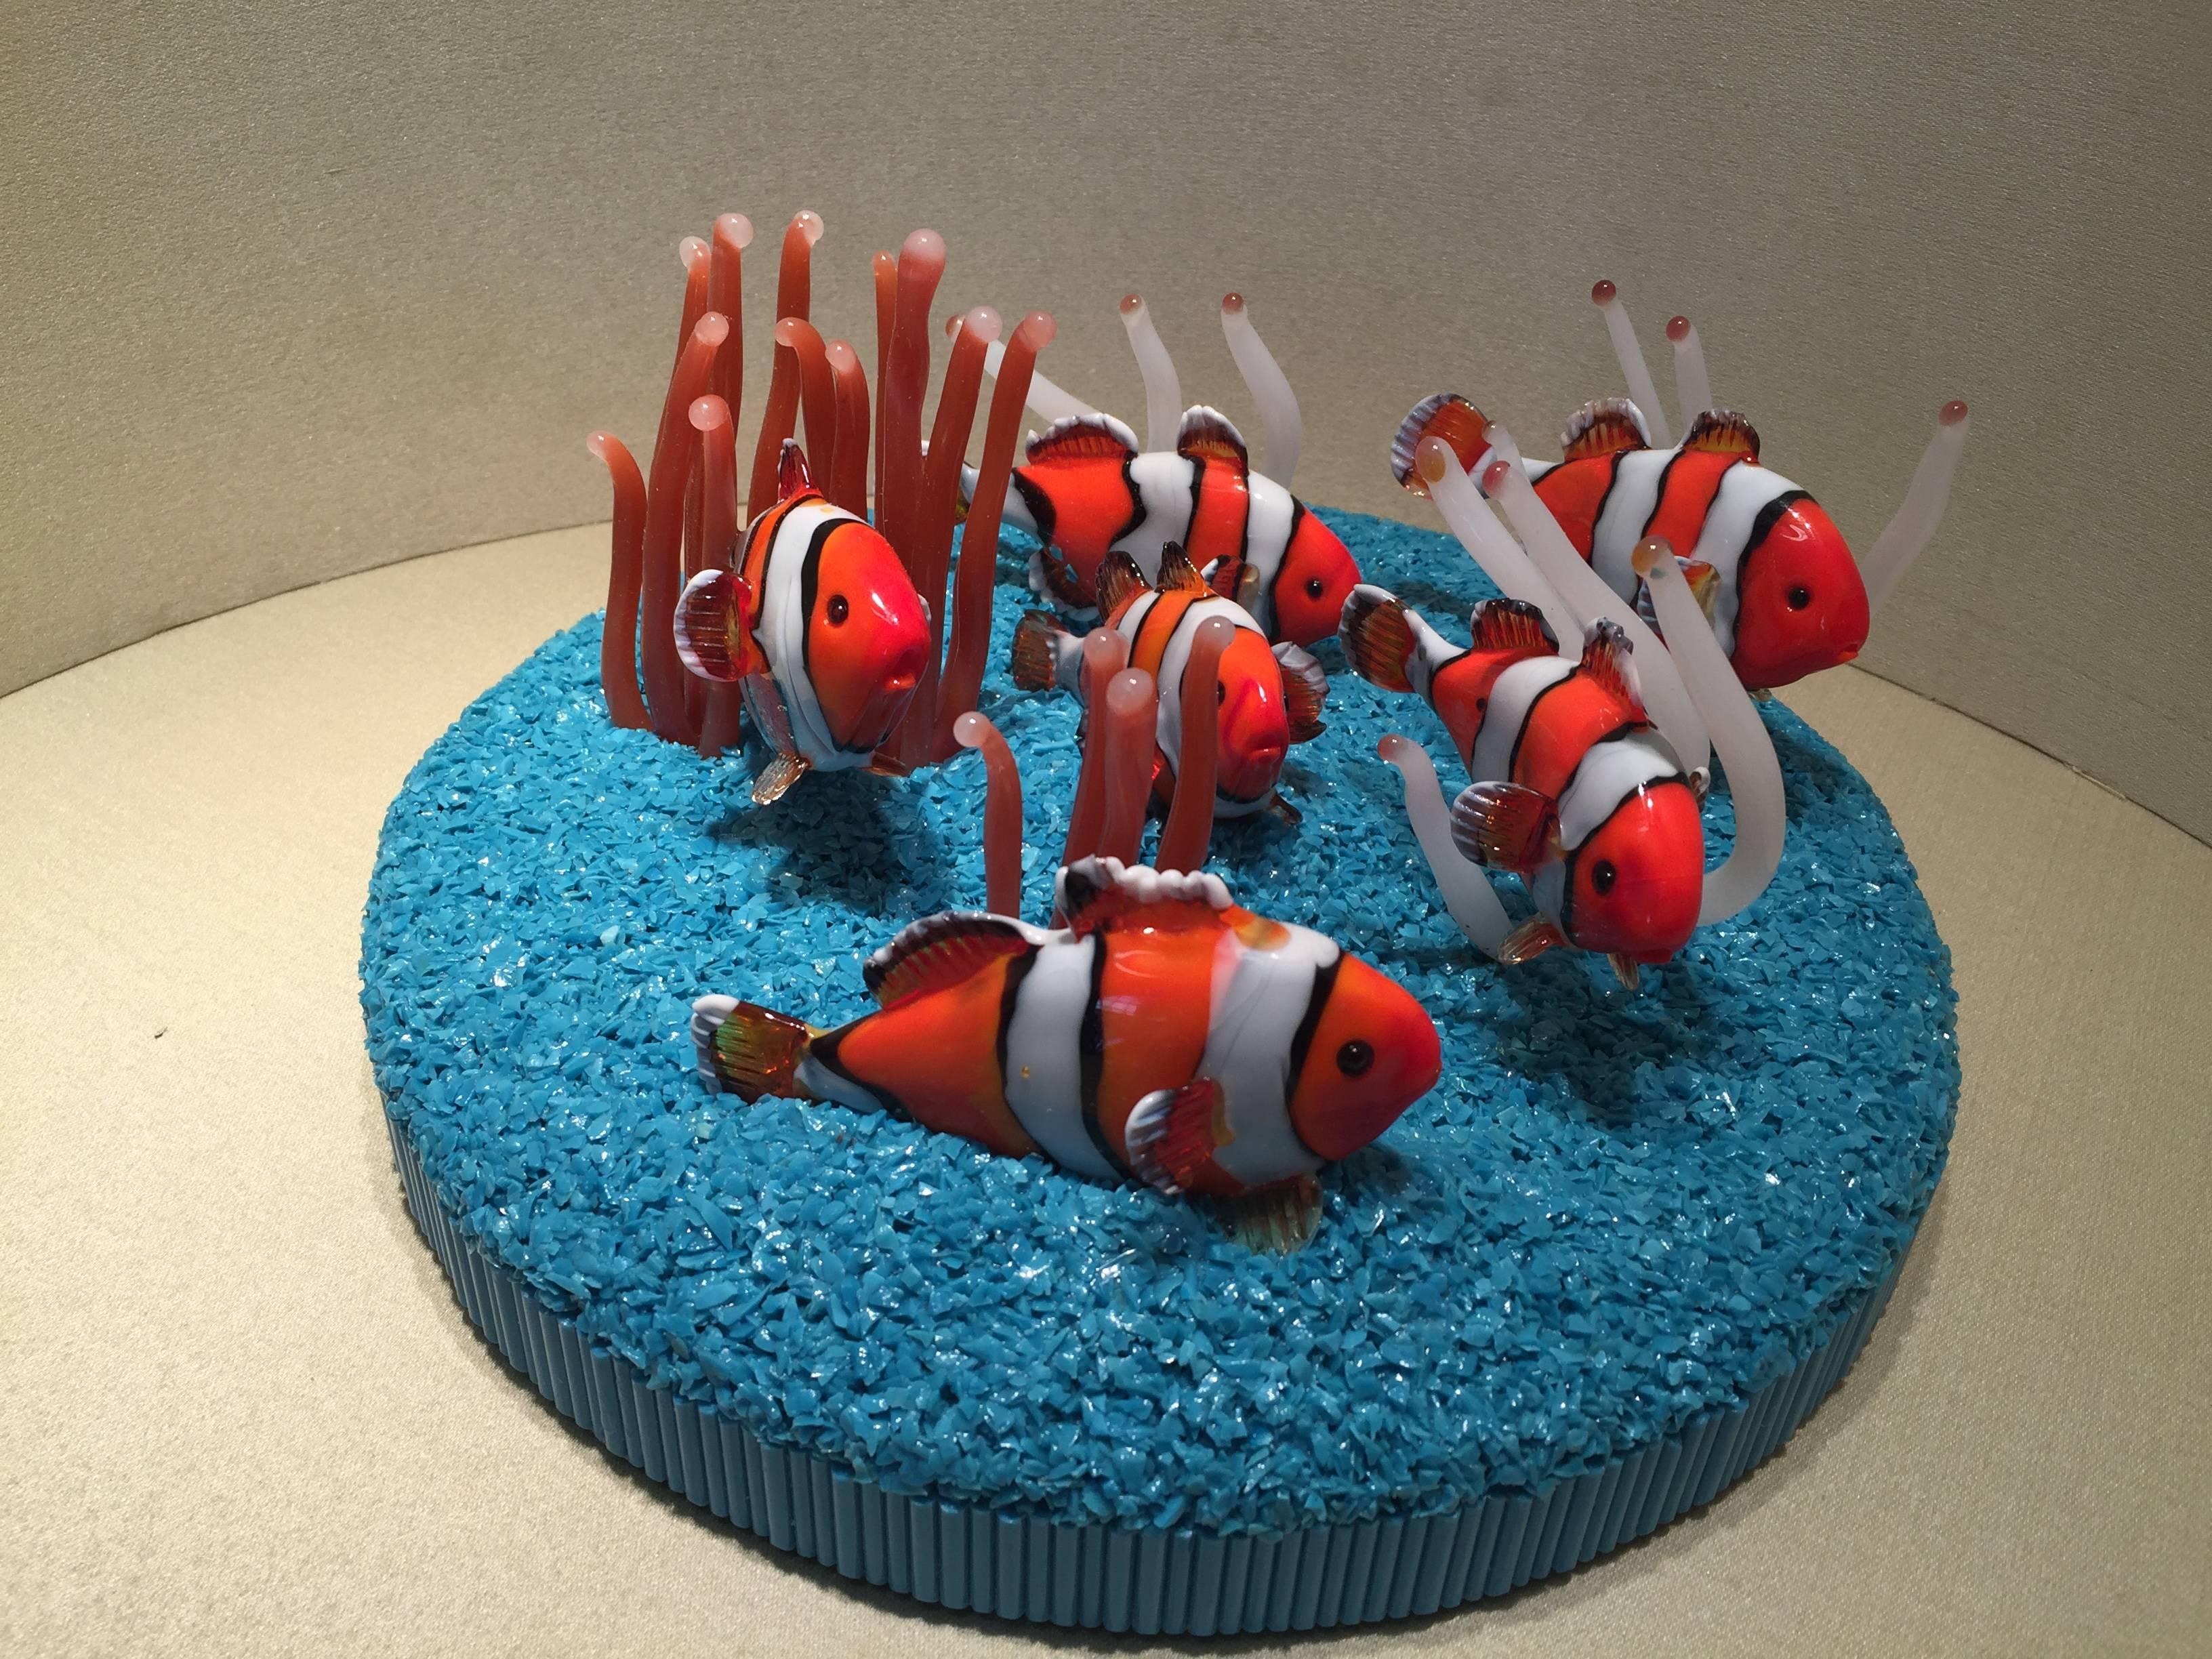 An amazing and one of a kind Murano glass sculpture with different types of fish to represent a small barrier reef, the base in square shape is covered with glass mosaic, high quality details totally handmade.

Check other beautiful Art Works in